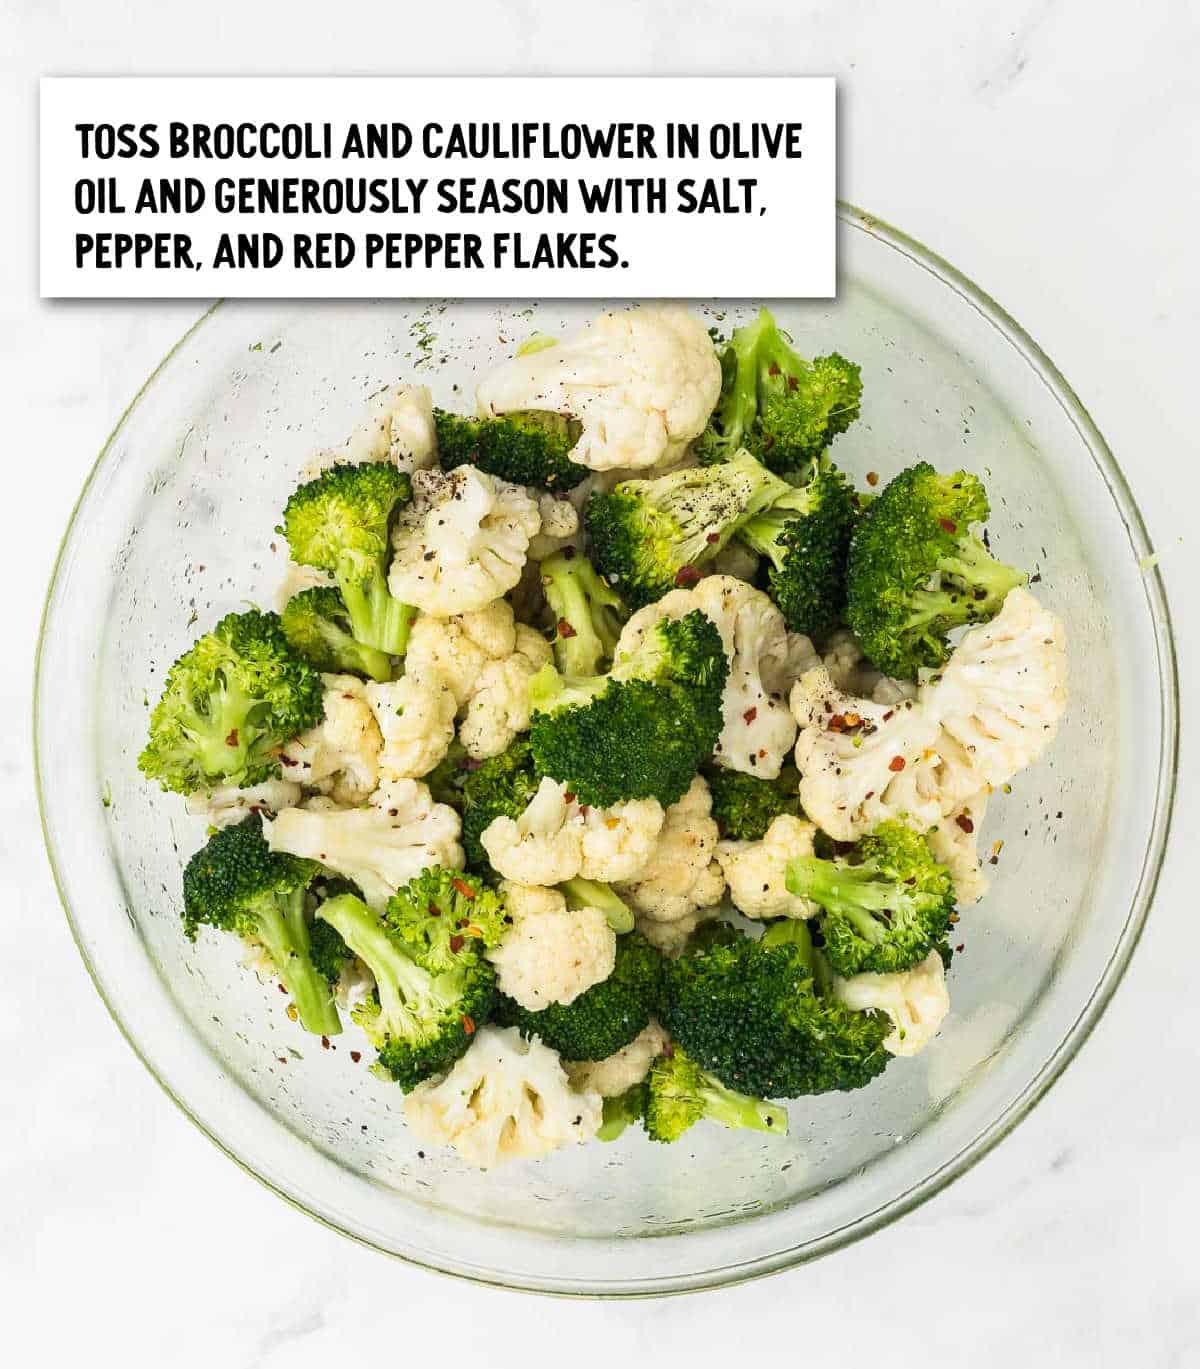 Broccoli and Cauliflower tossed in olive oil and seasoned in a large glass bowl.